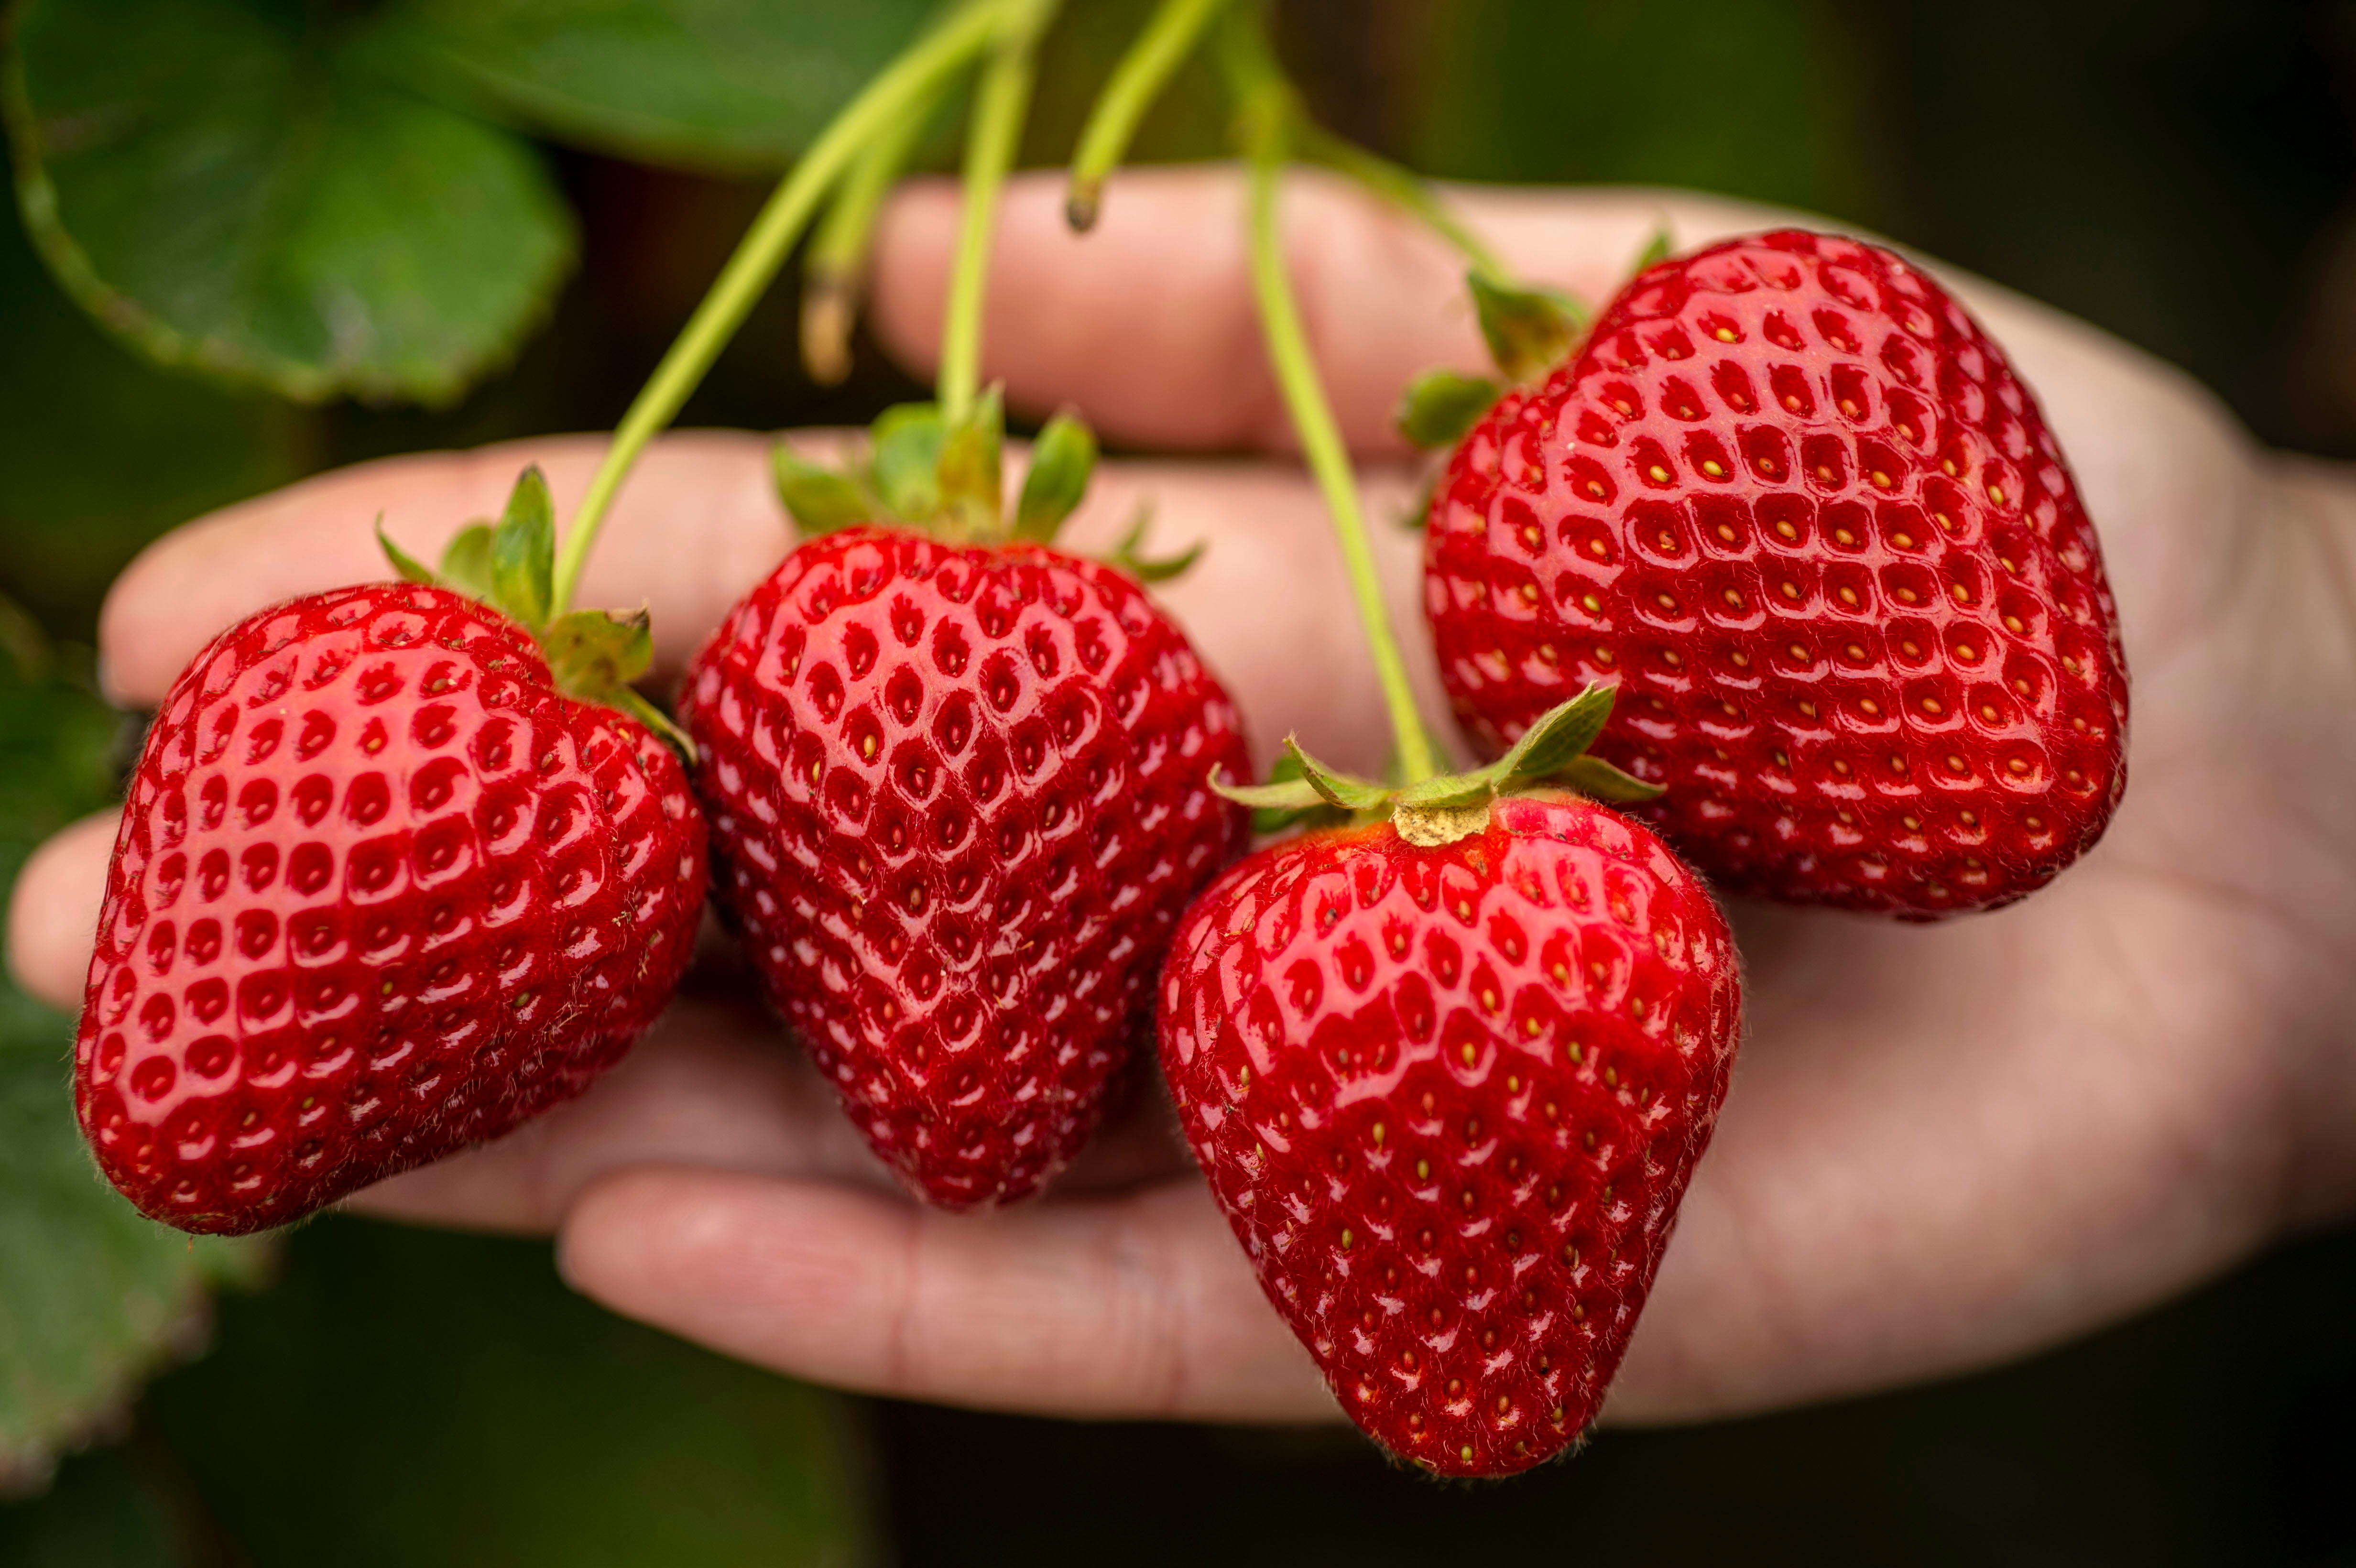 Five new strawberry varieties were released that will help growers manage diseases, control costs, use fewer inputs and produce plenty of tasty, robust berries for consumers.